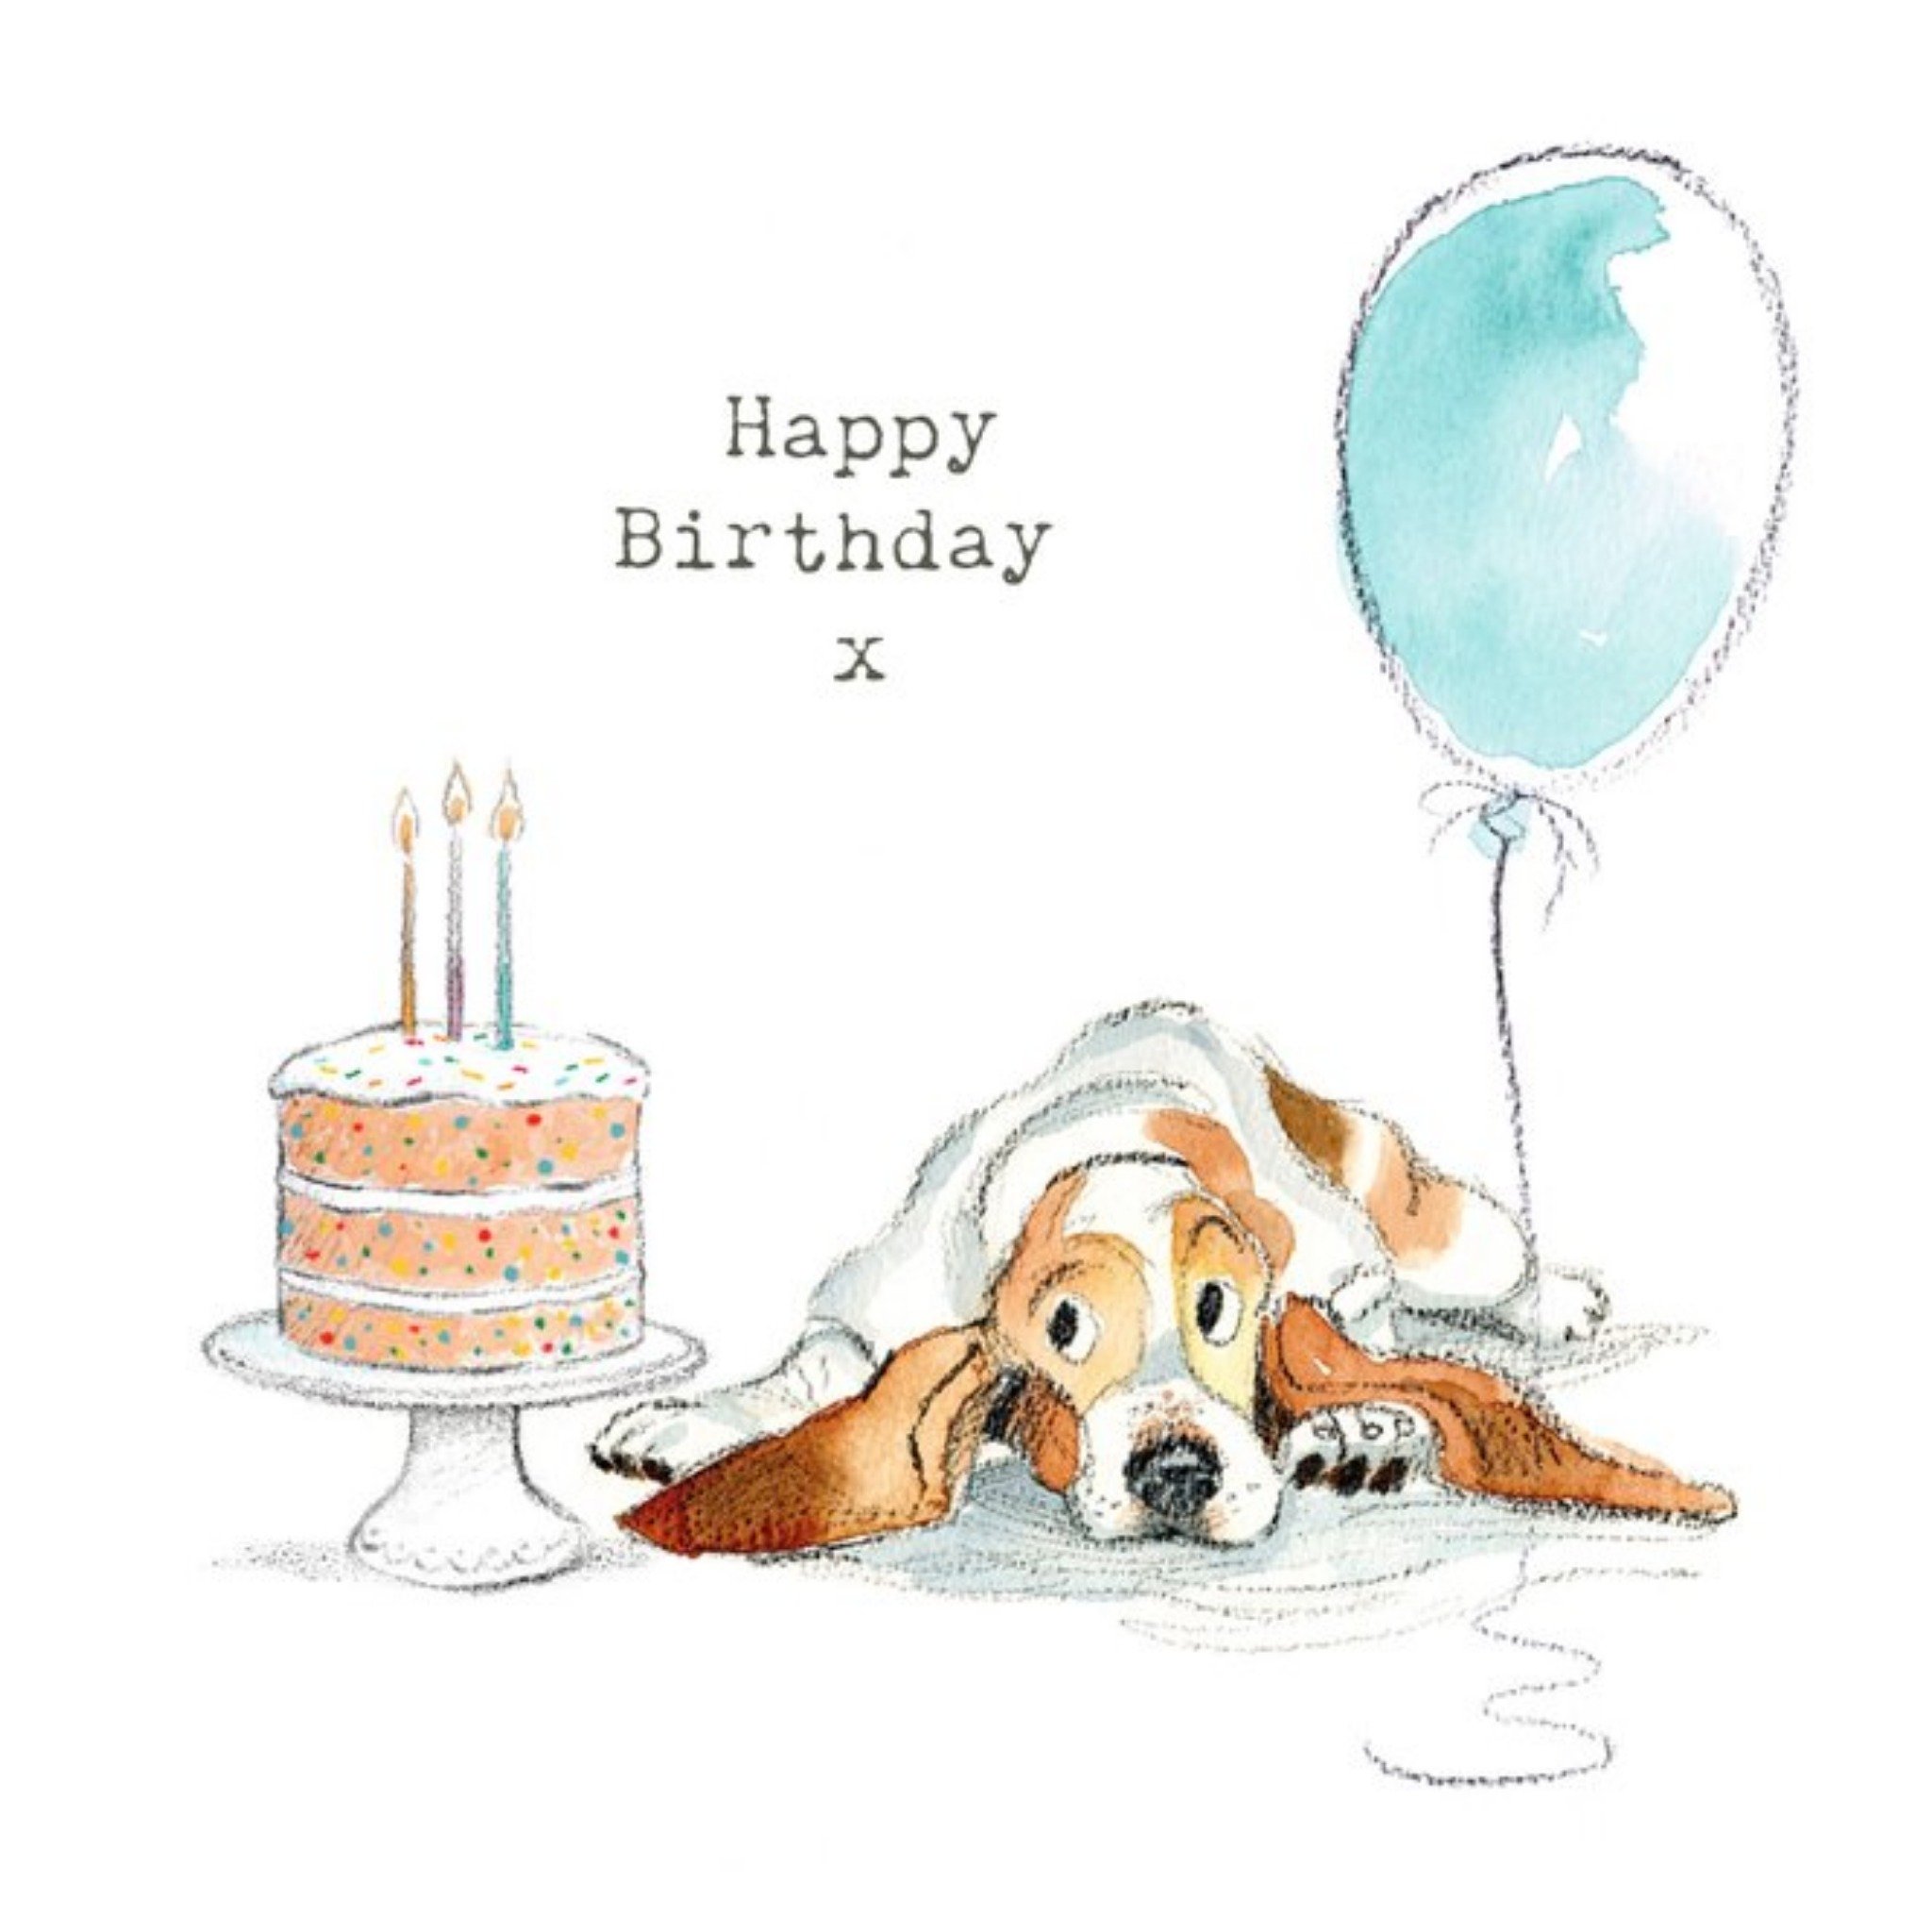 Moonpig Illustration Of A Cute Dog With A Cake And A Balloon Birthday Card, Large